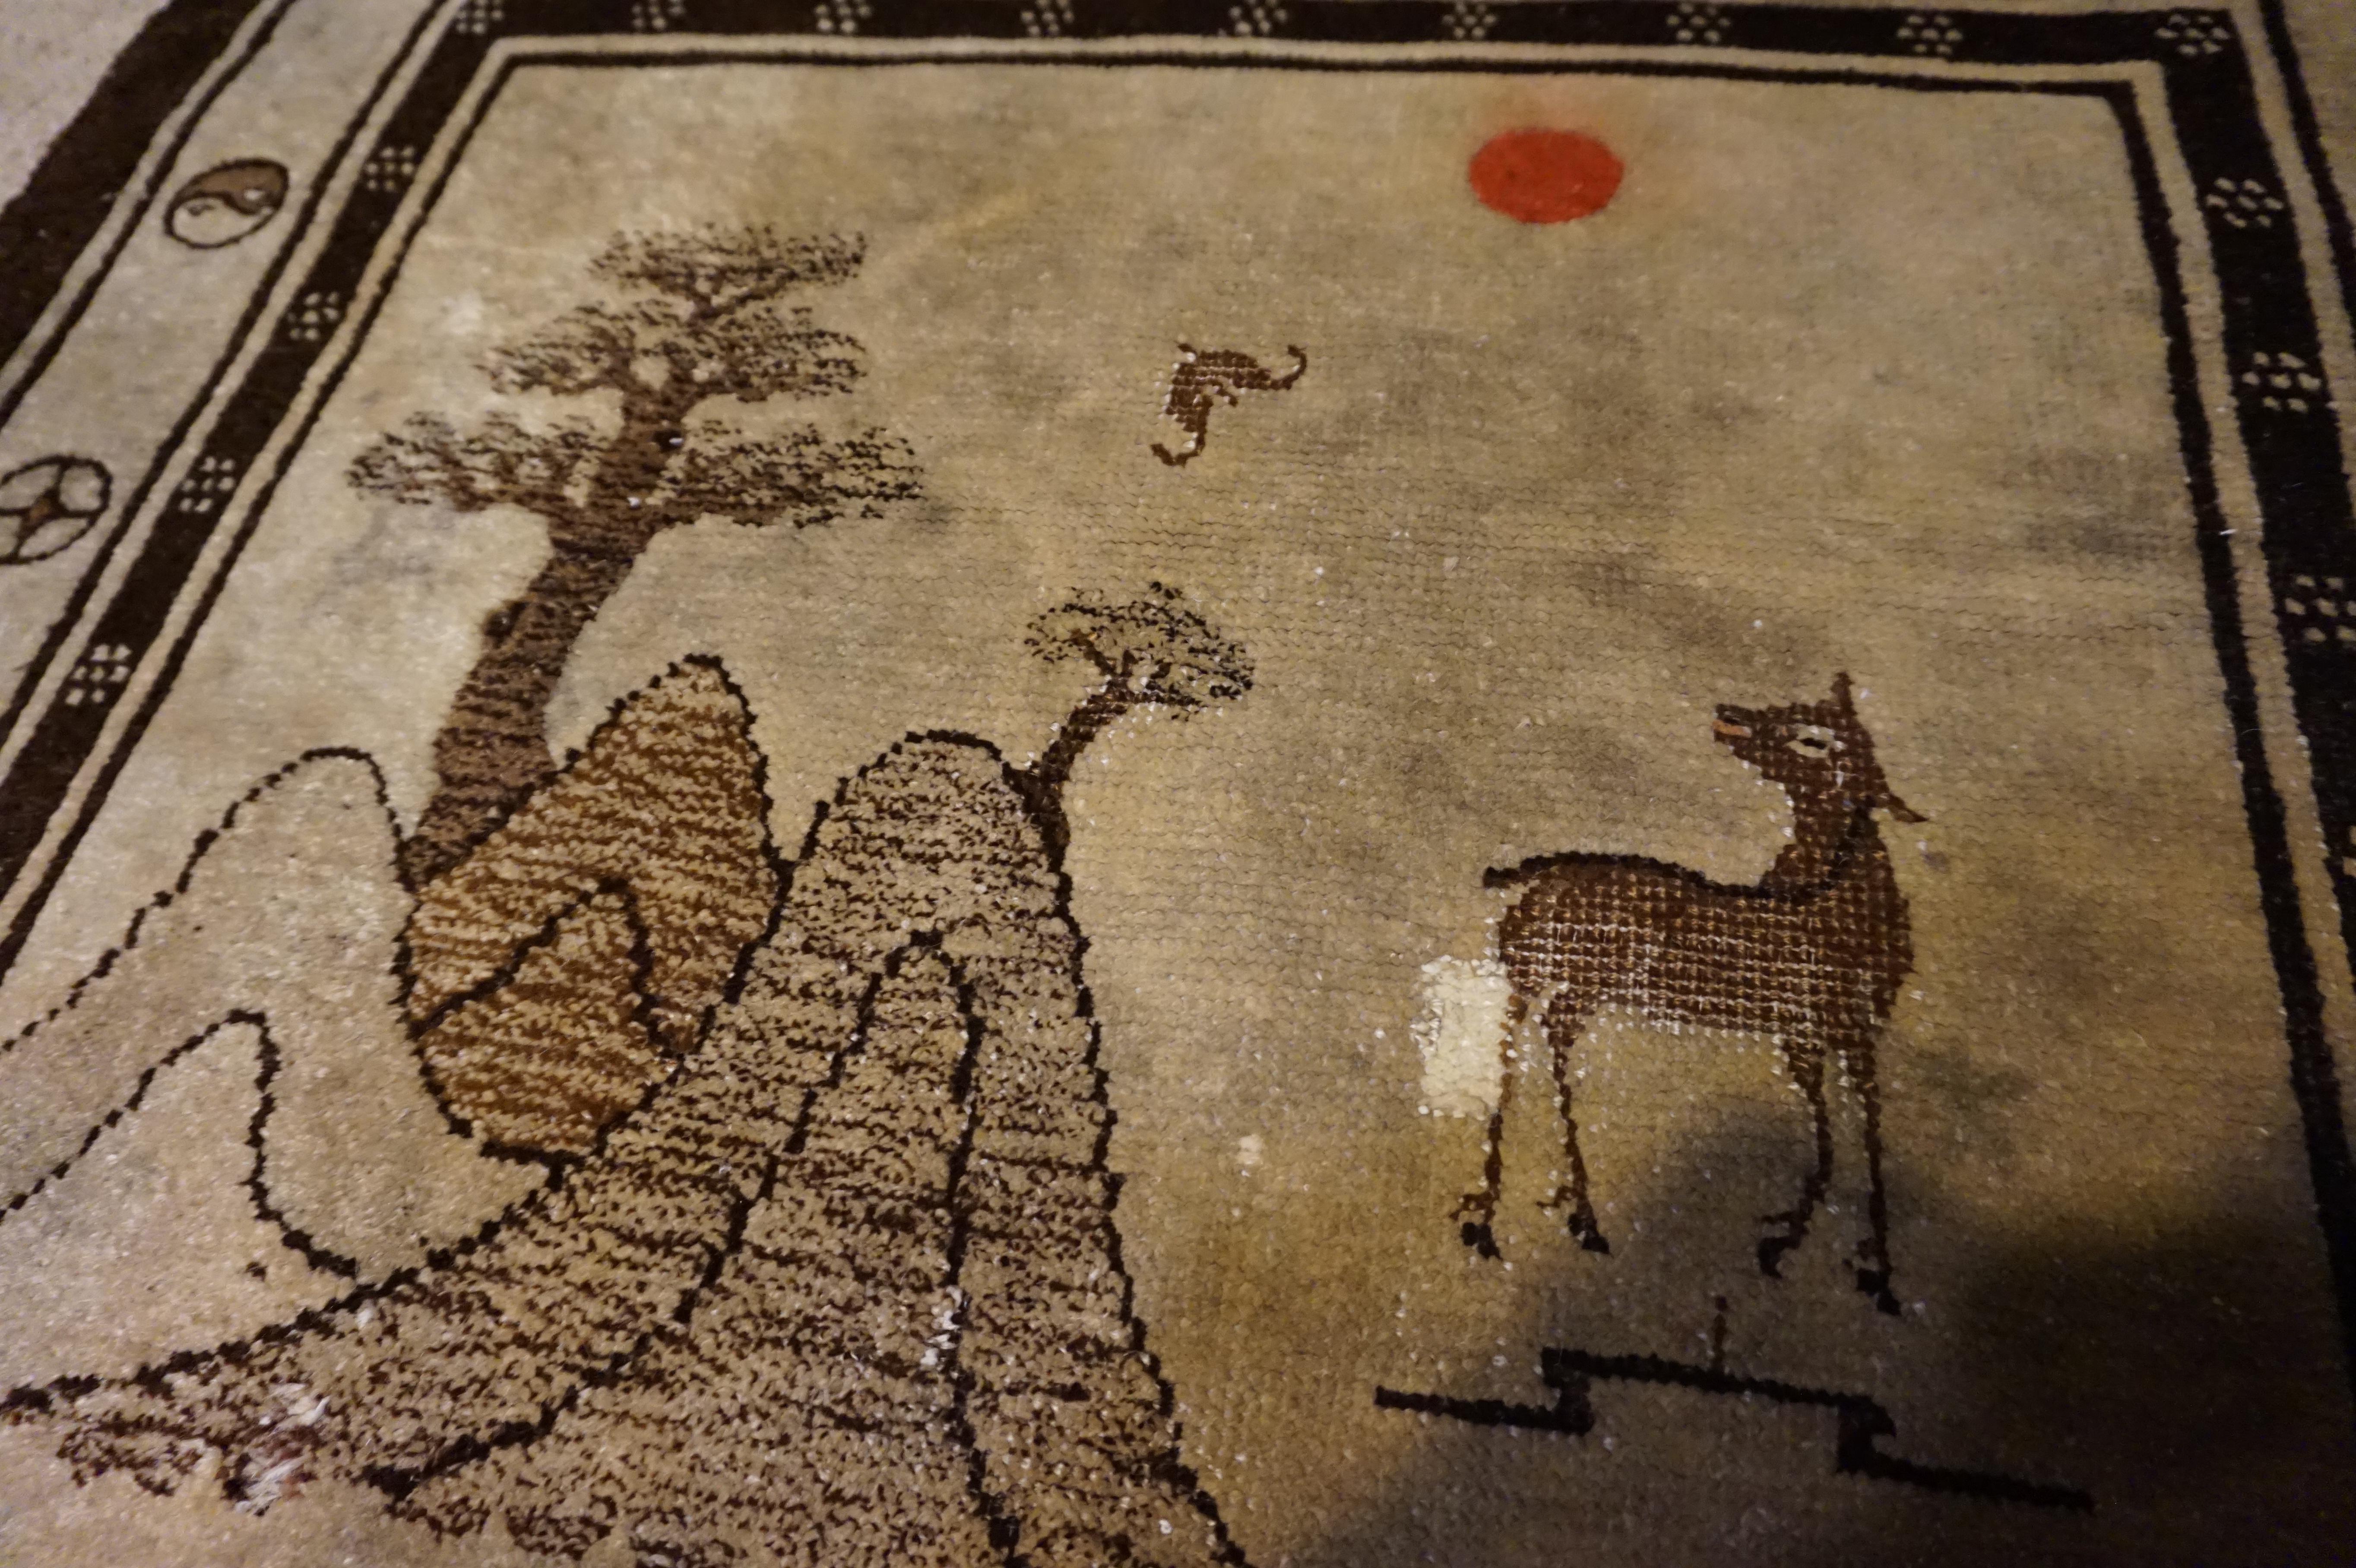 Early 20th Century 1920s Tibetan Hand Knotted Deer and Seasons Rug Symbolism Sepia Tone Red Sun